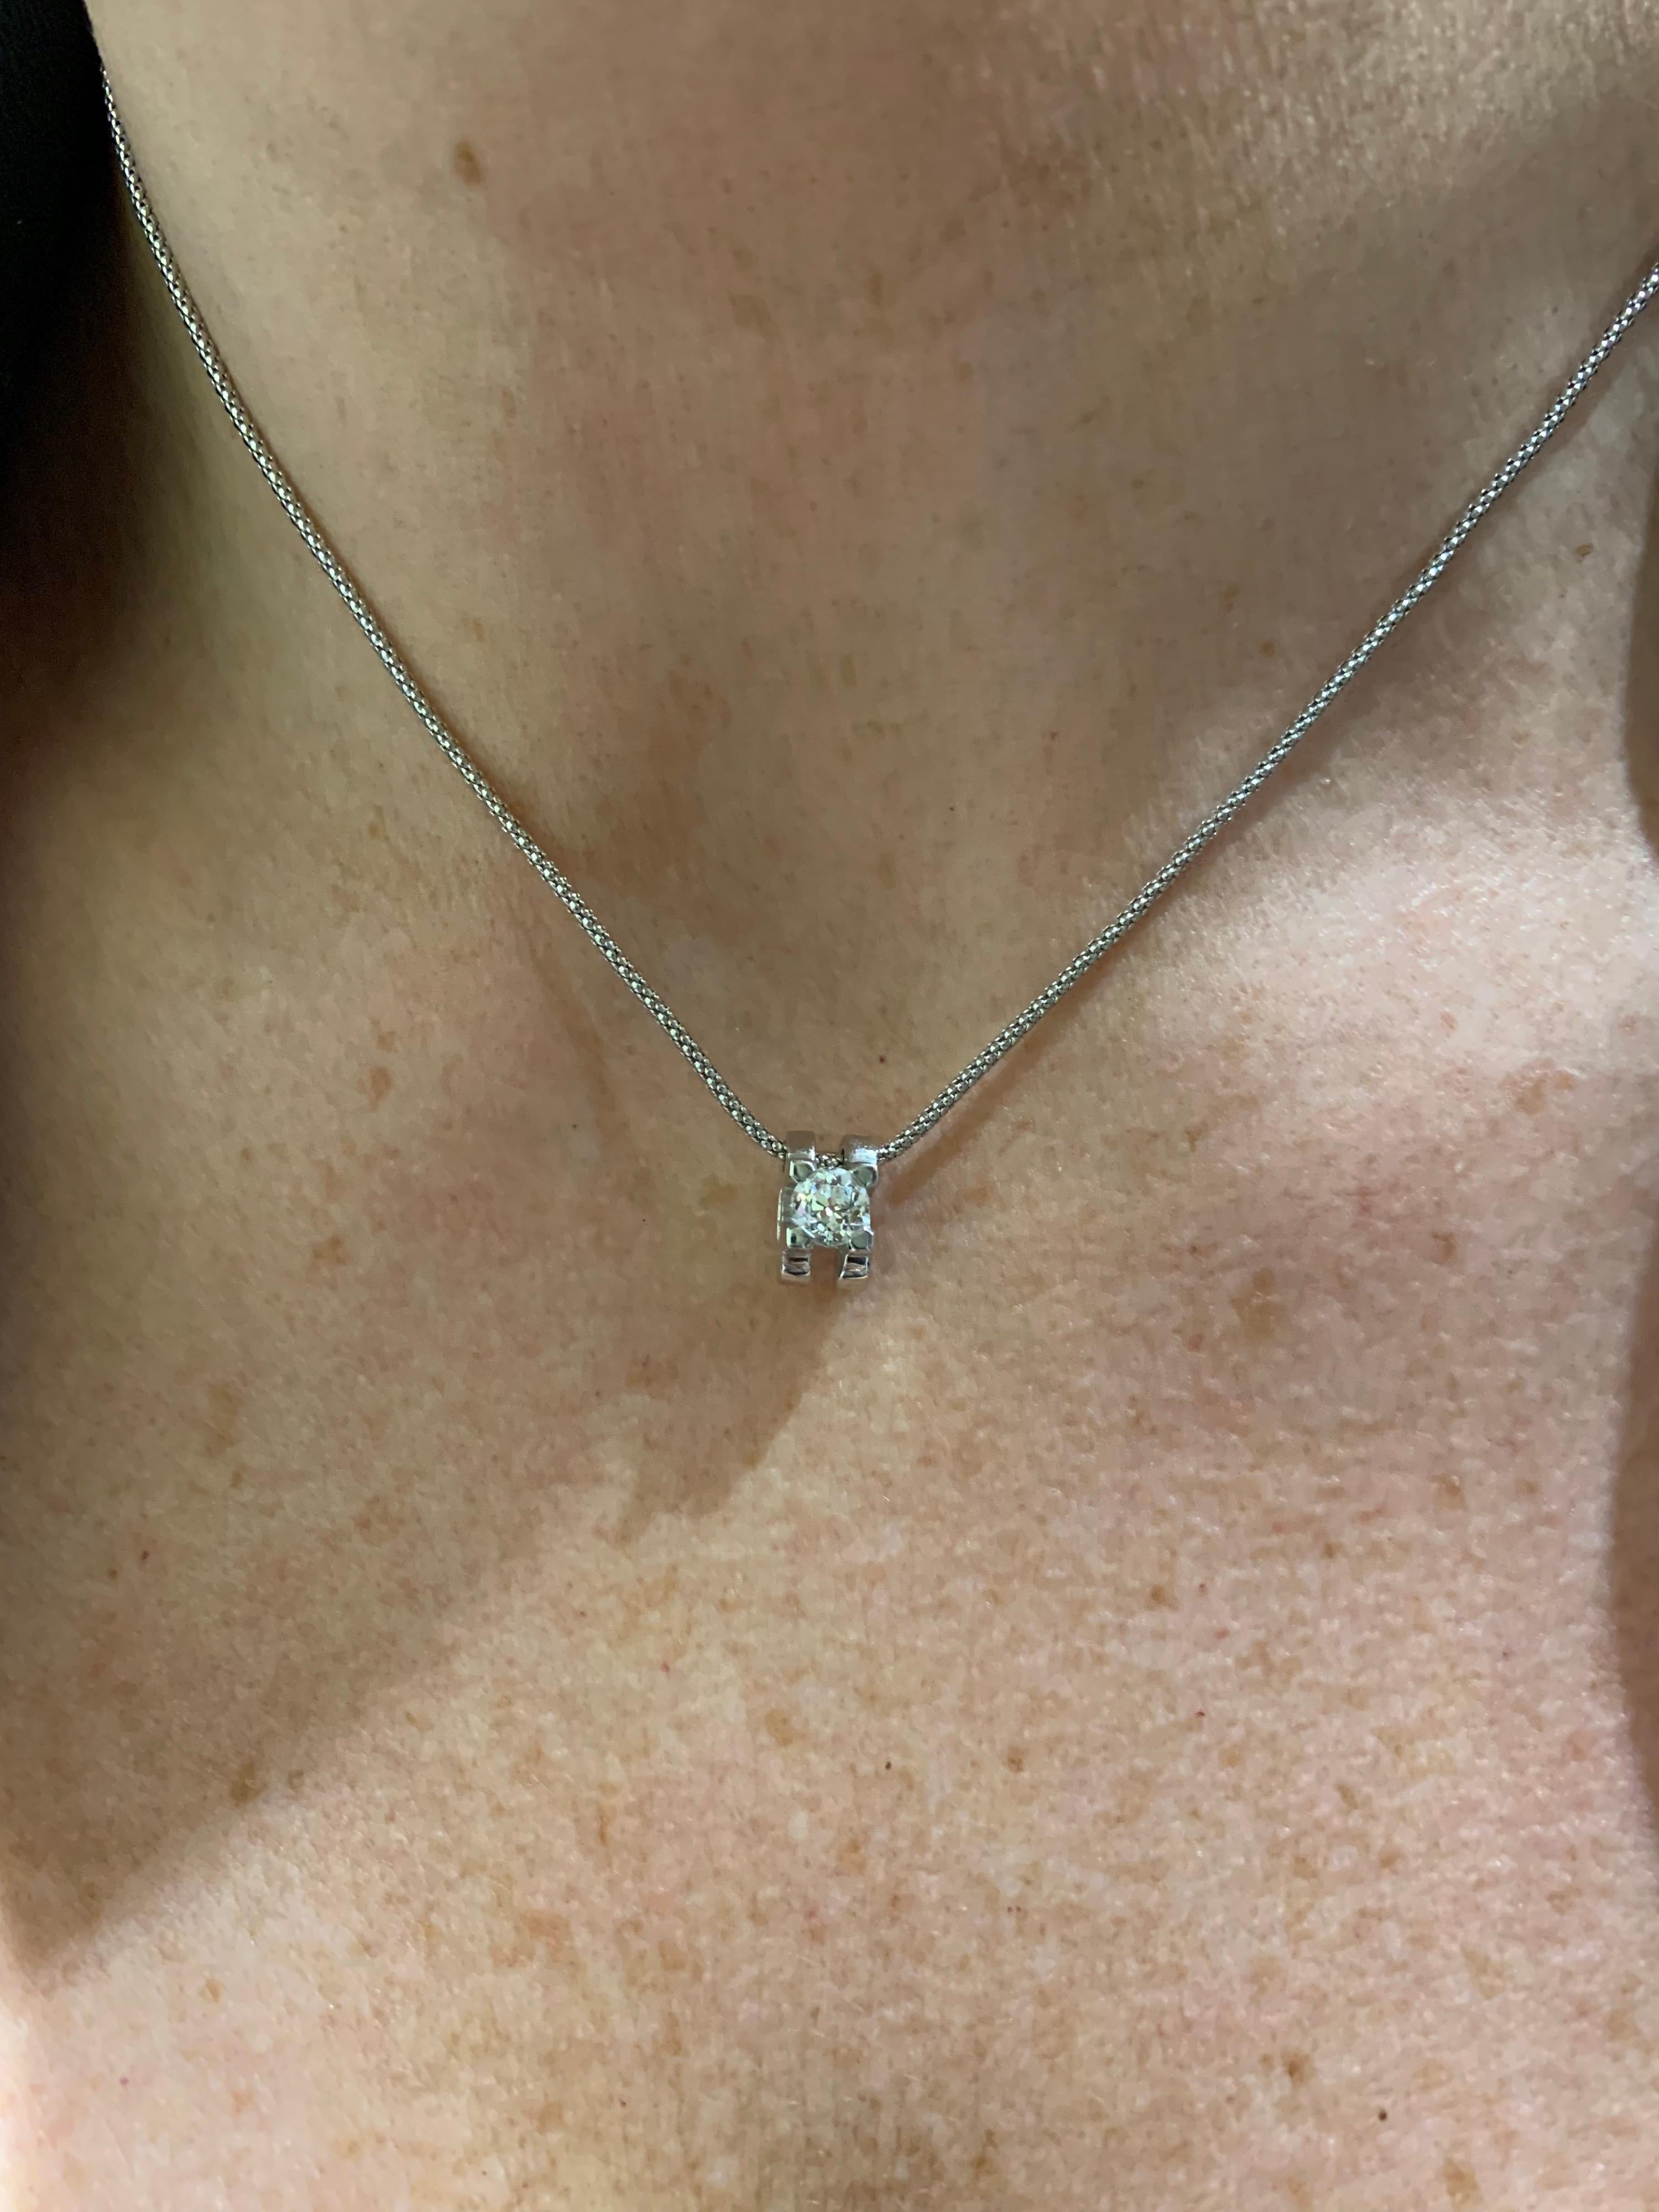 An 18k white gold diamond pendant. The diamond is an old European cut and weighs 0.56ct, the colour is H and the clarity is VS2. The diamond is set in a modern 4 claw setting. The pendant has an 18k white gold 16 inch chain and has a gross weight of